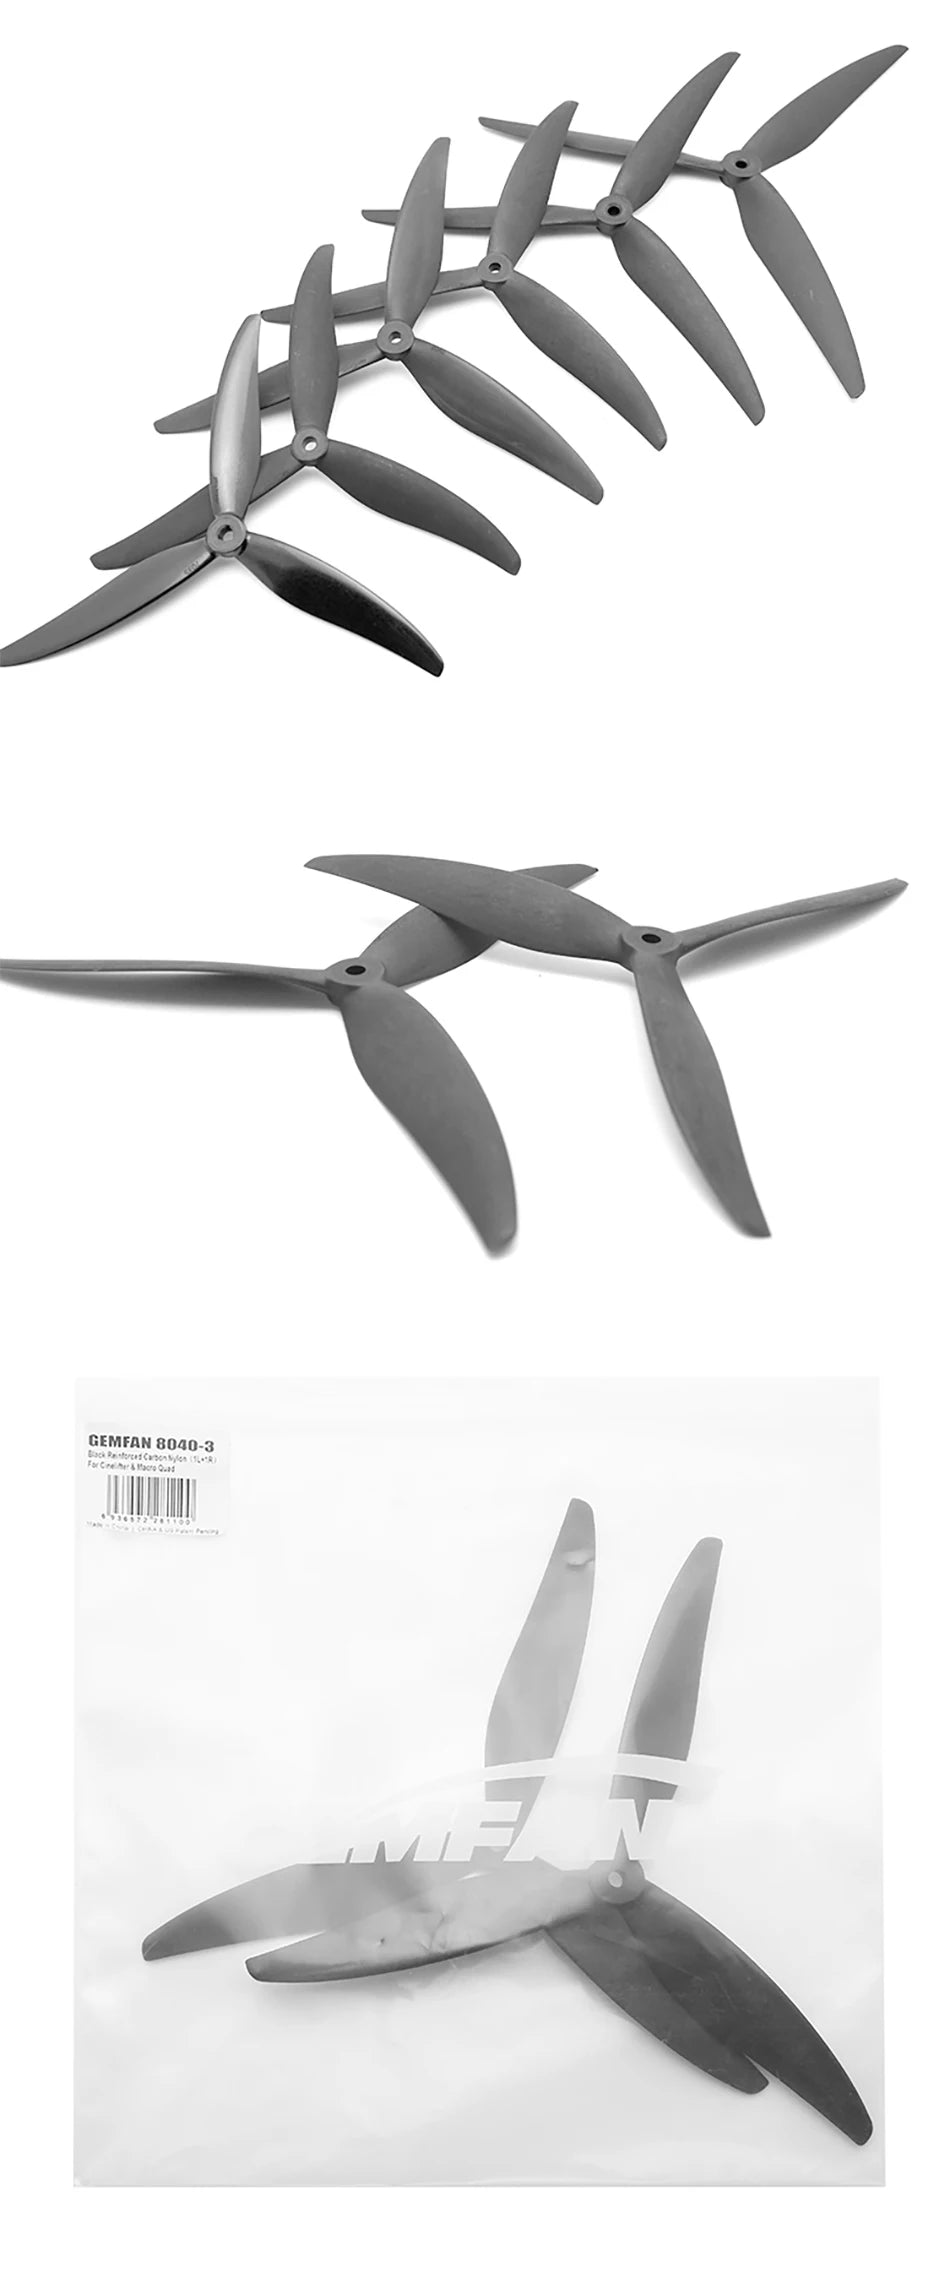 2PAIRS GEMFAN Drone Propeller, XDRC is a leading manufacturer of drone propellers . xDR